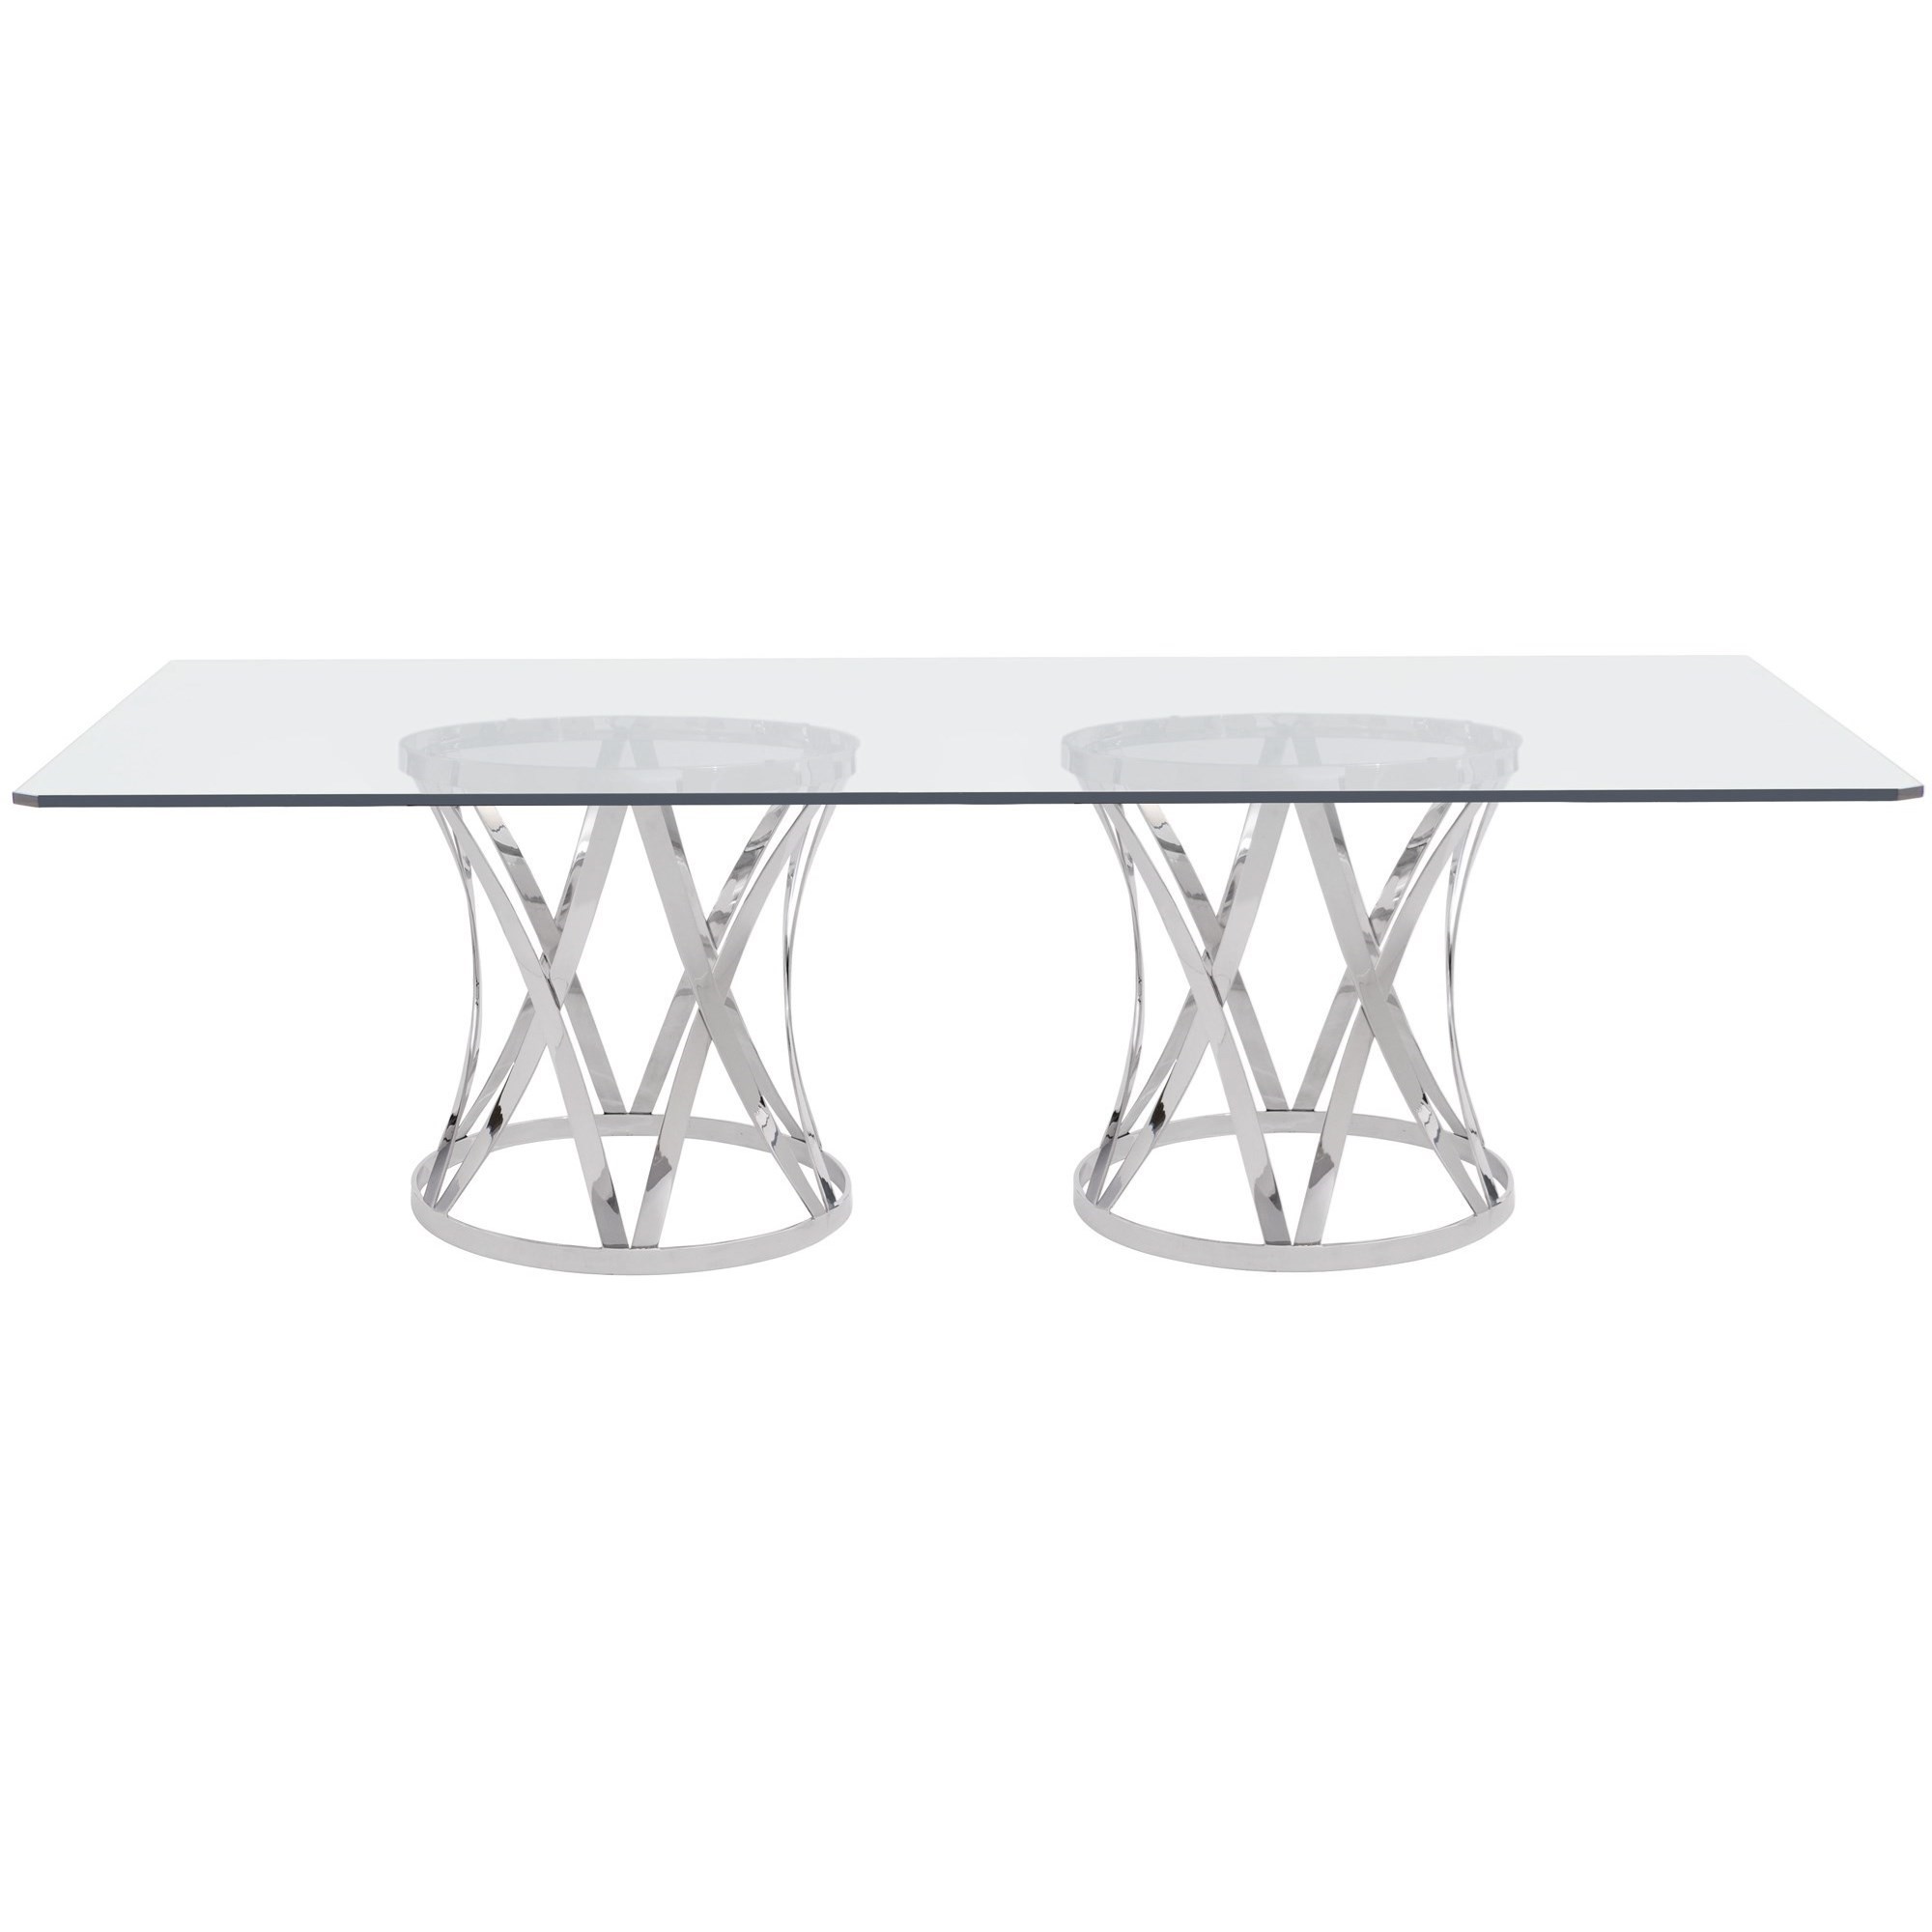 Steel and glass dining table